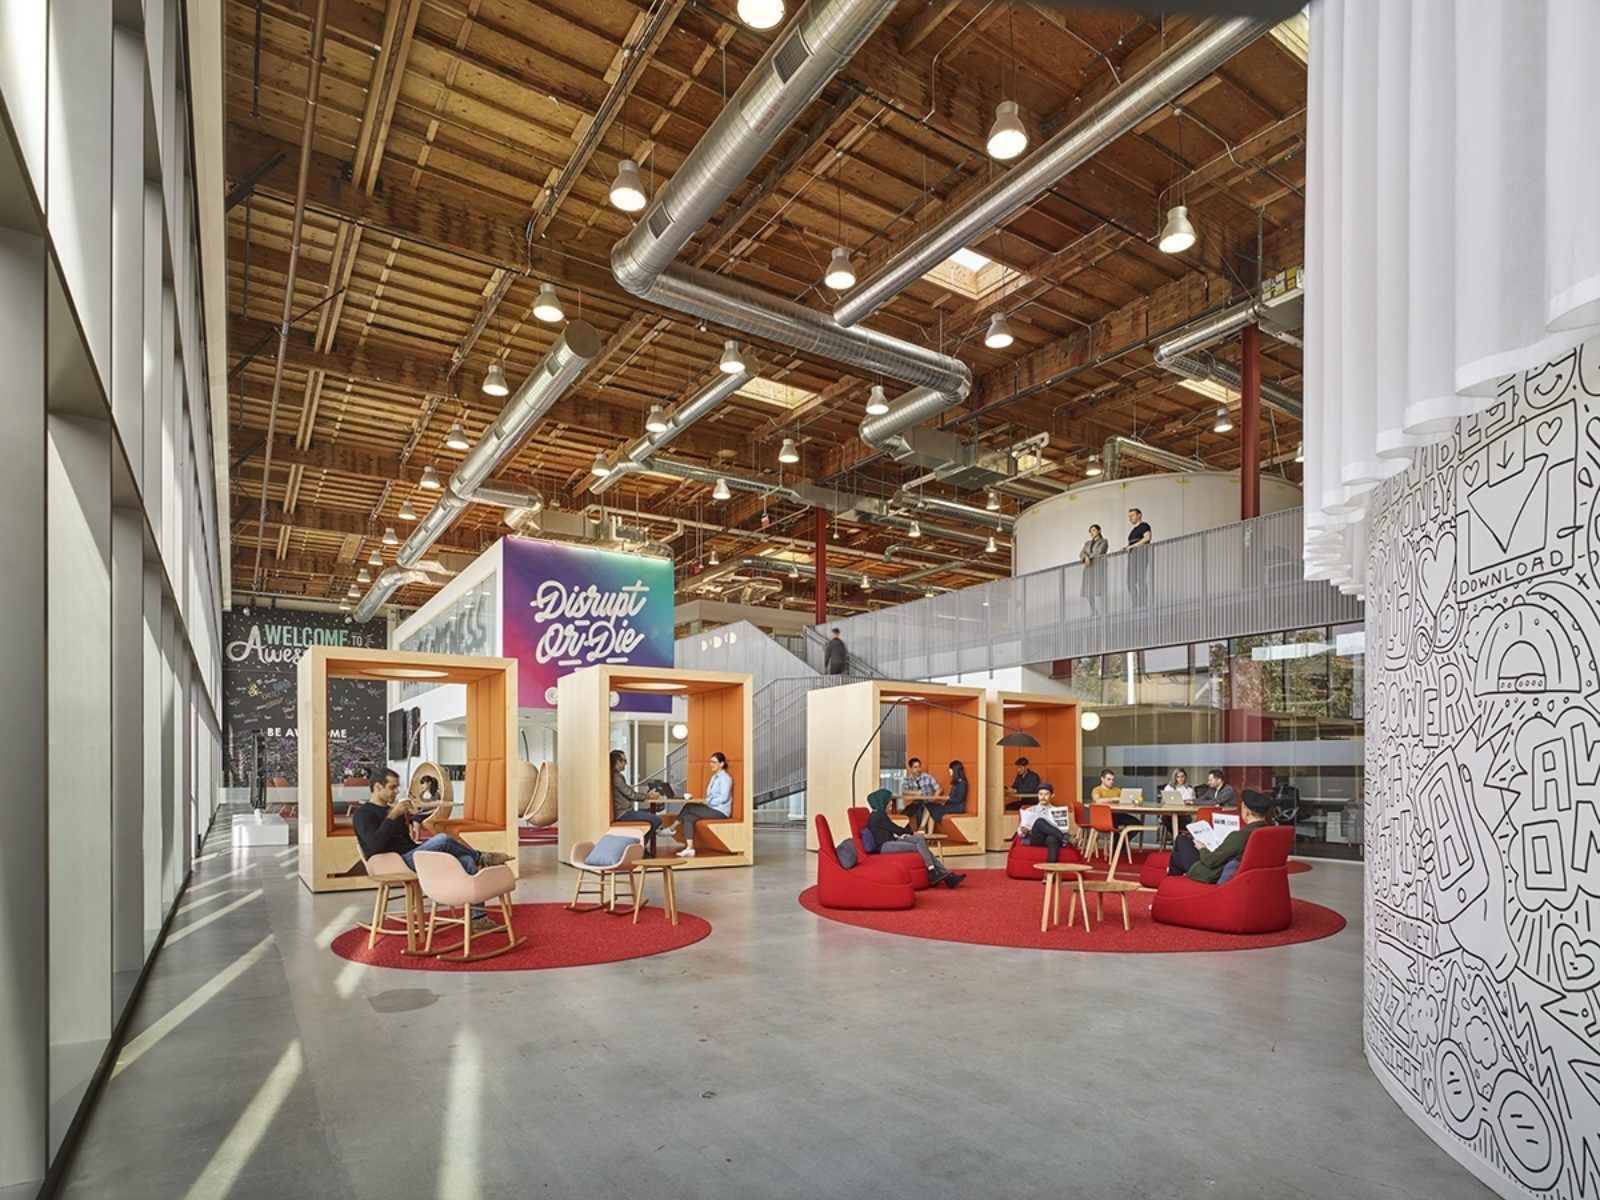 An open space with high ceilings. Round rugs on the floor. Booths for small meetings or independent work. An interior bridge for access to second floor.